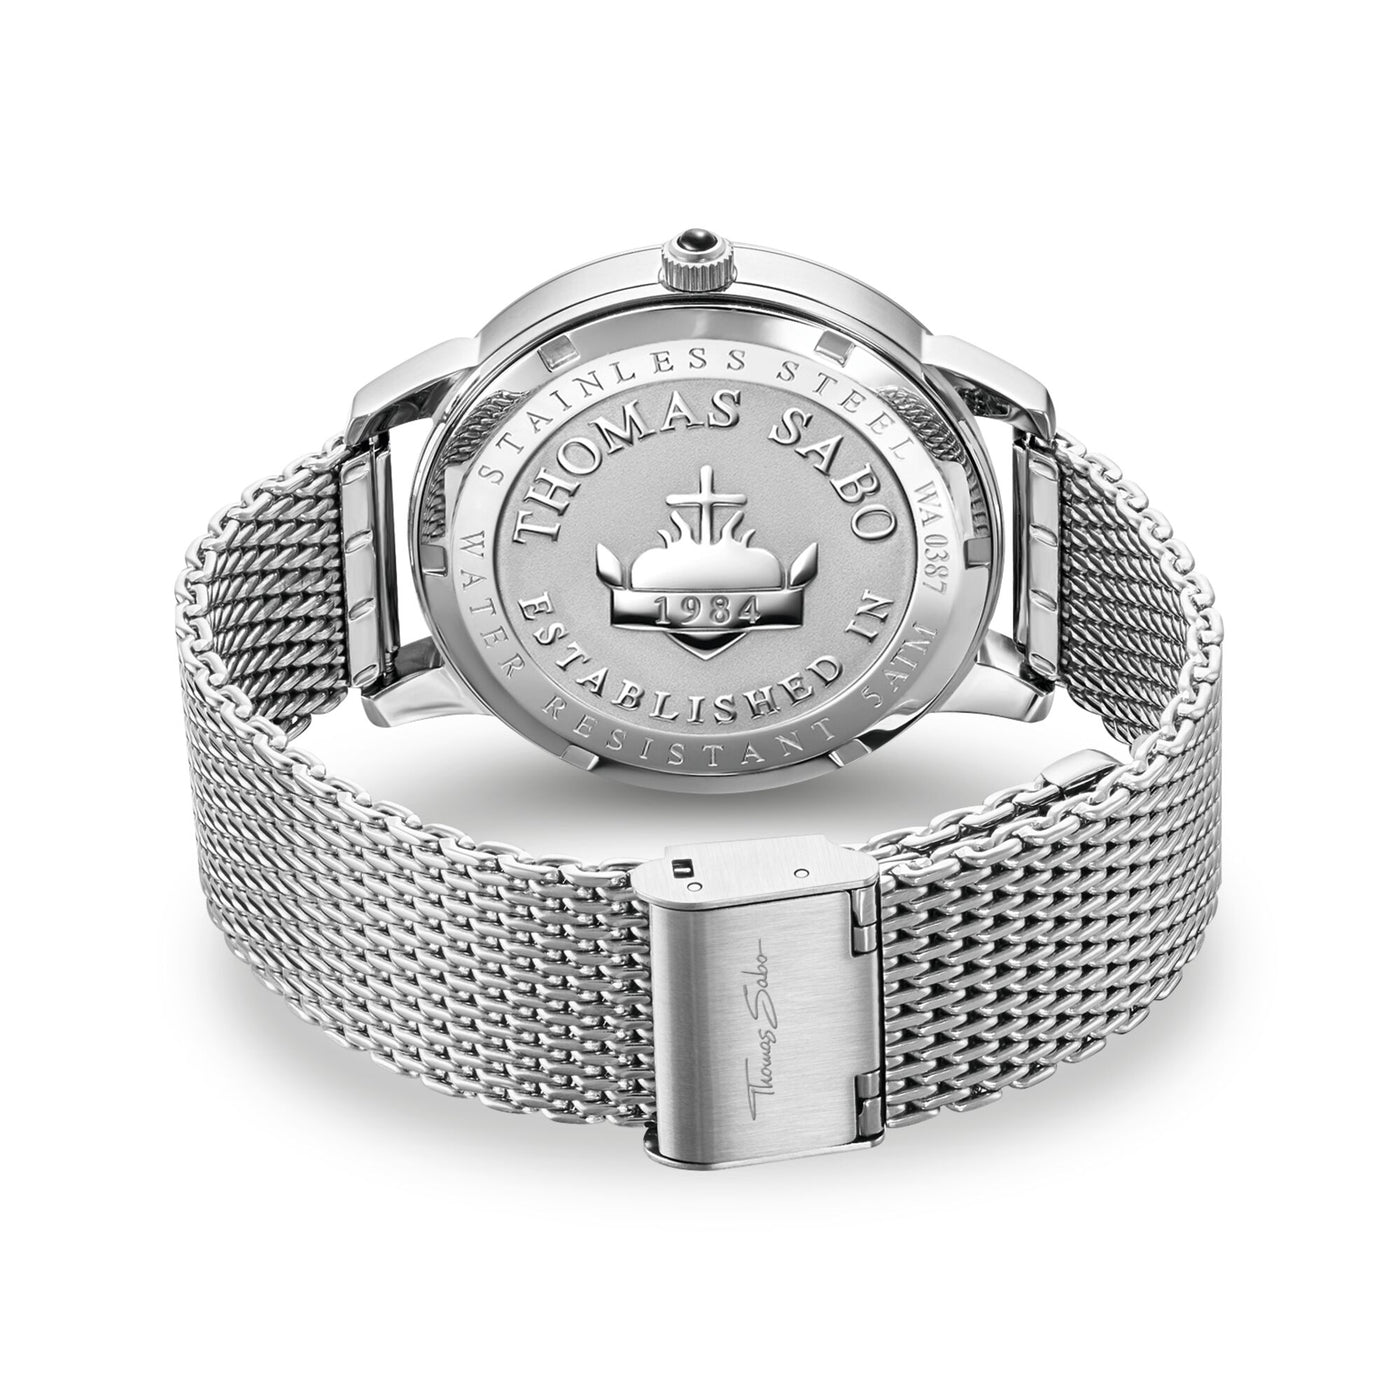 THOMAS SABO Men's watch elements of nature silver